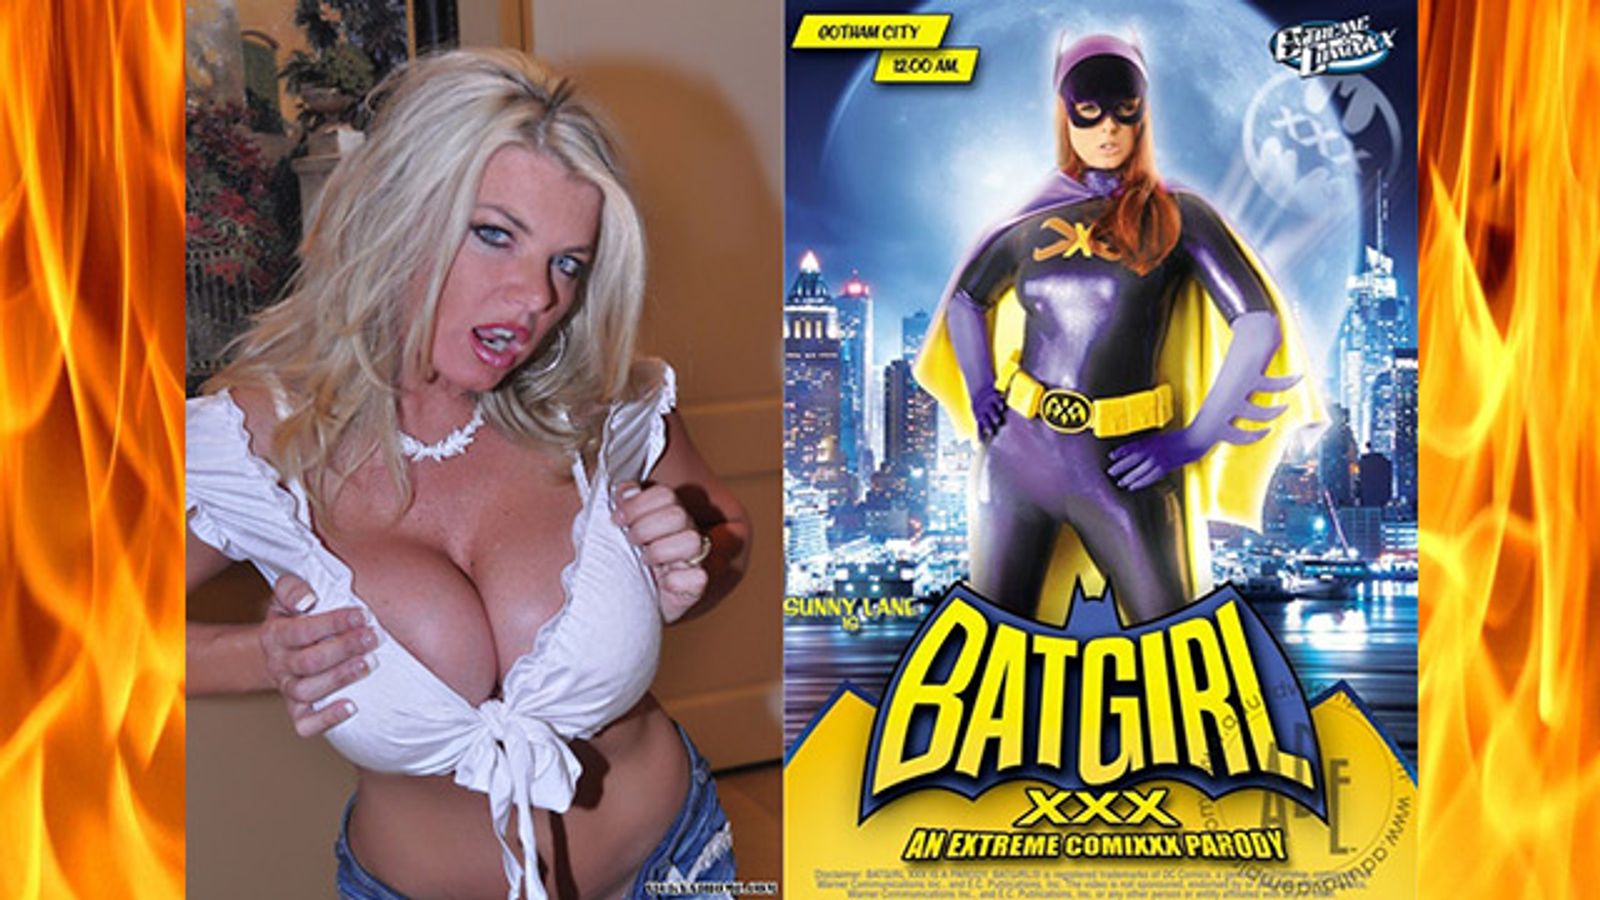 Vicky Vette & Sunny Lane to Appear At Chiller Theatre Expo in NJ